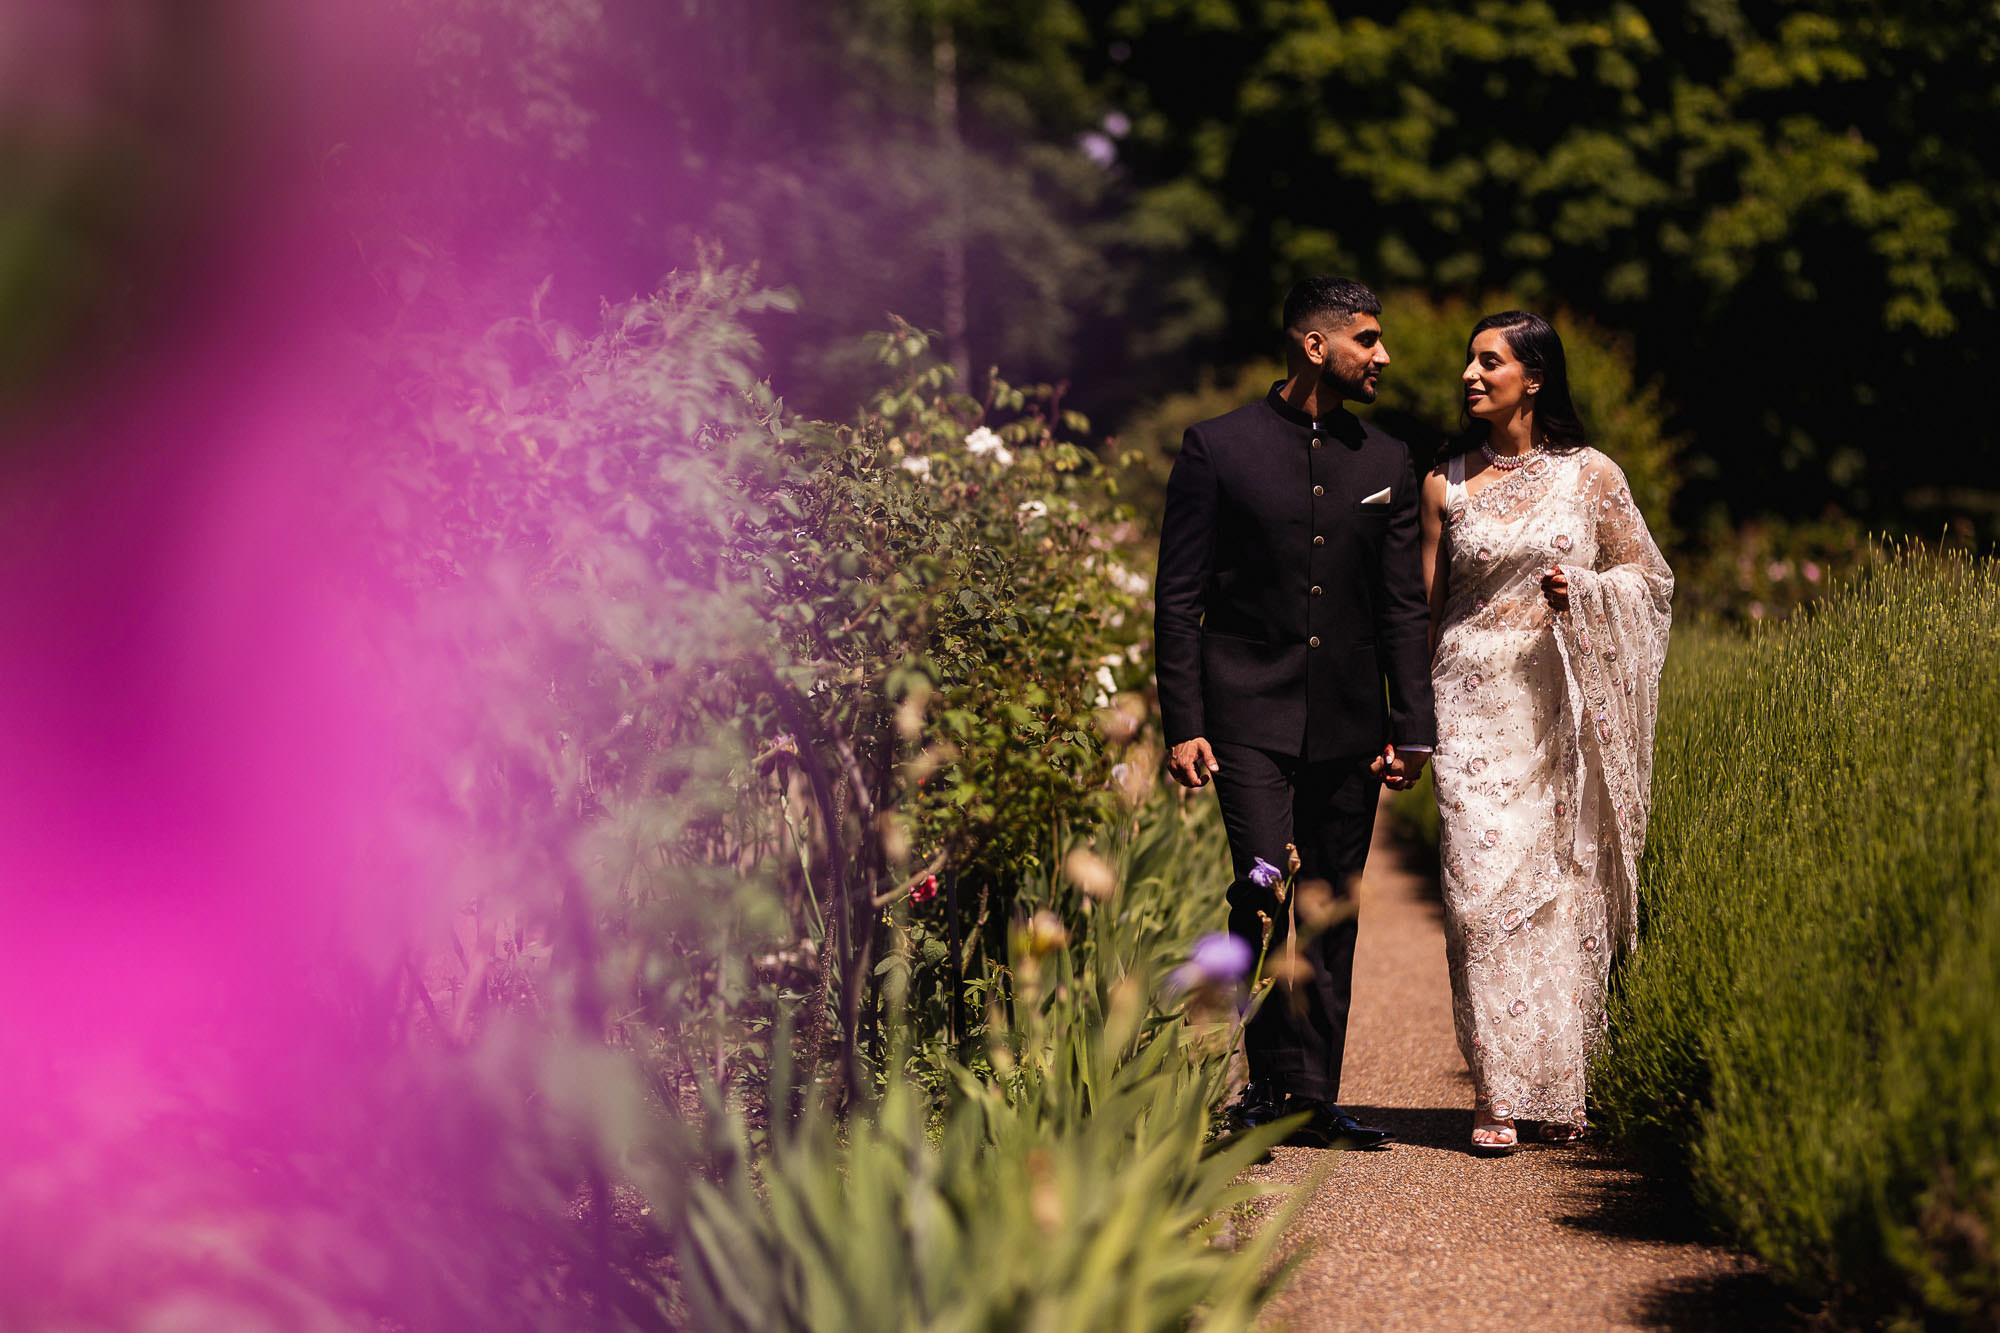 Civil Ceremony, Asian Wedding Photographer in London, Valentines Mansion, Couples portraits